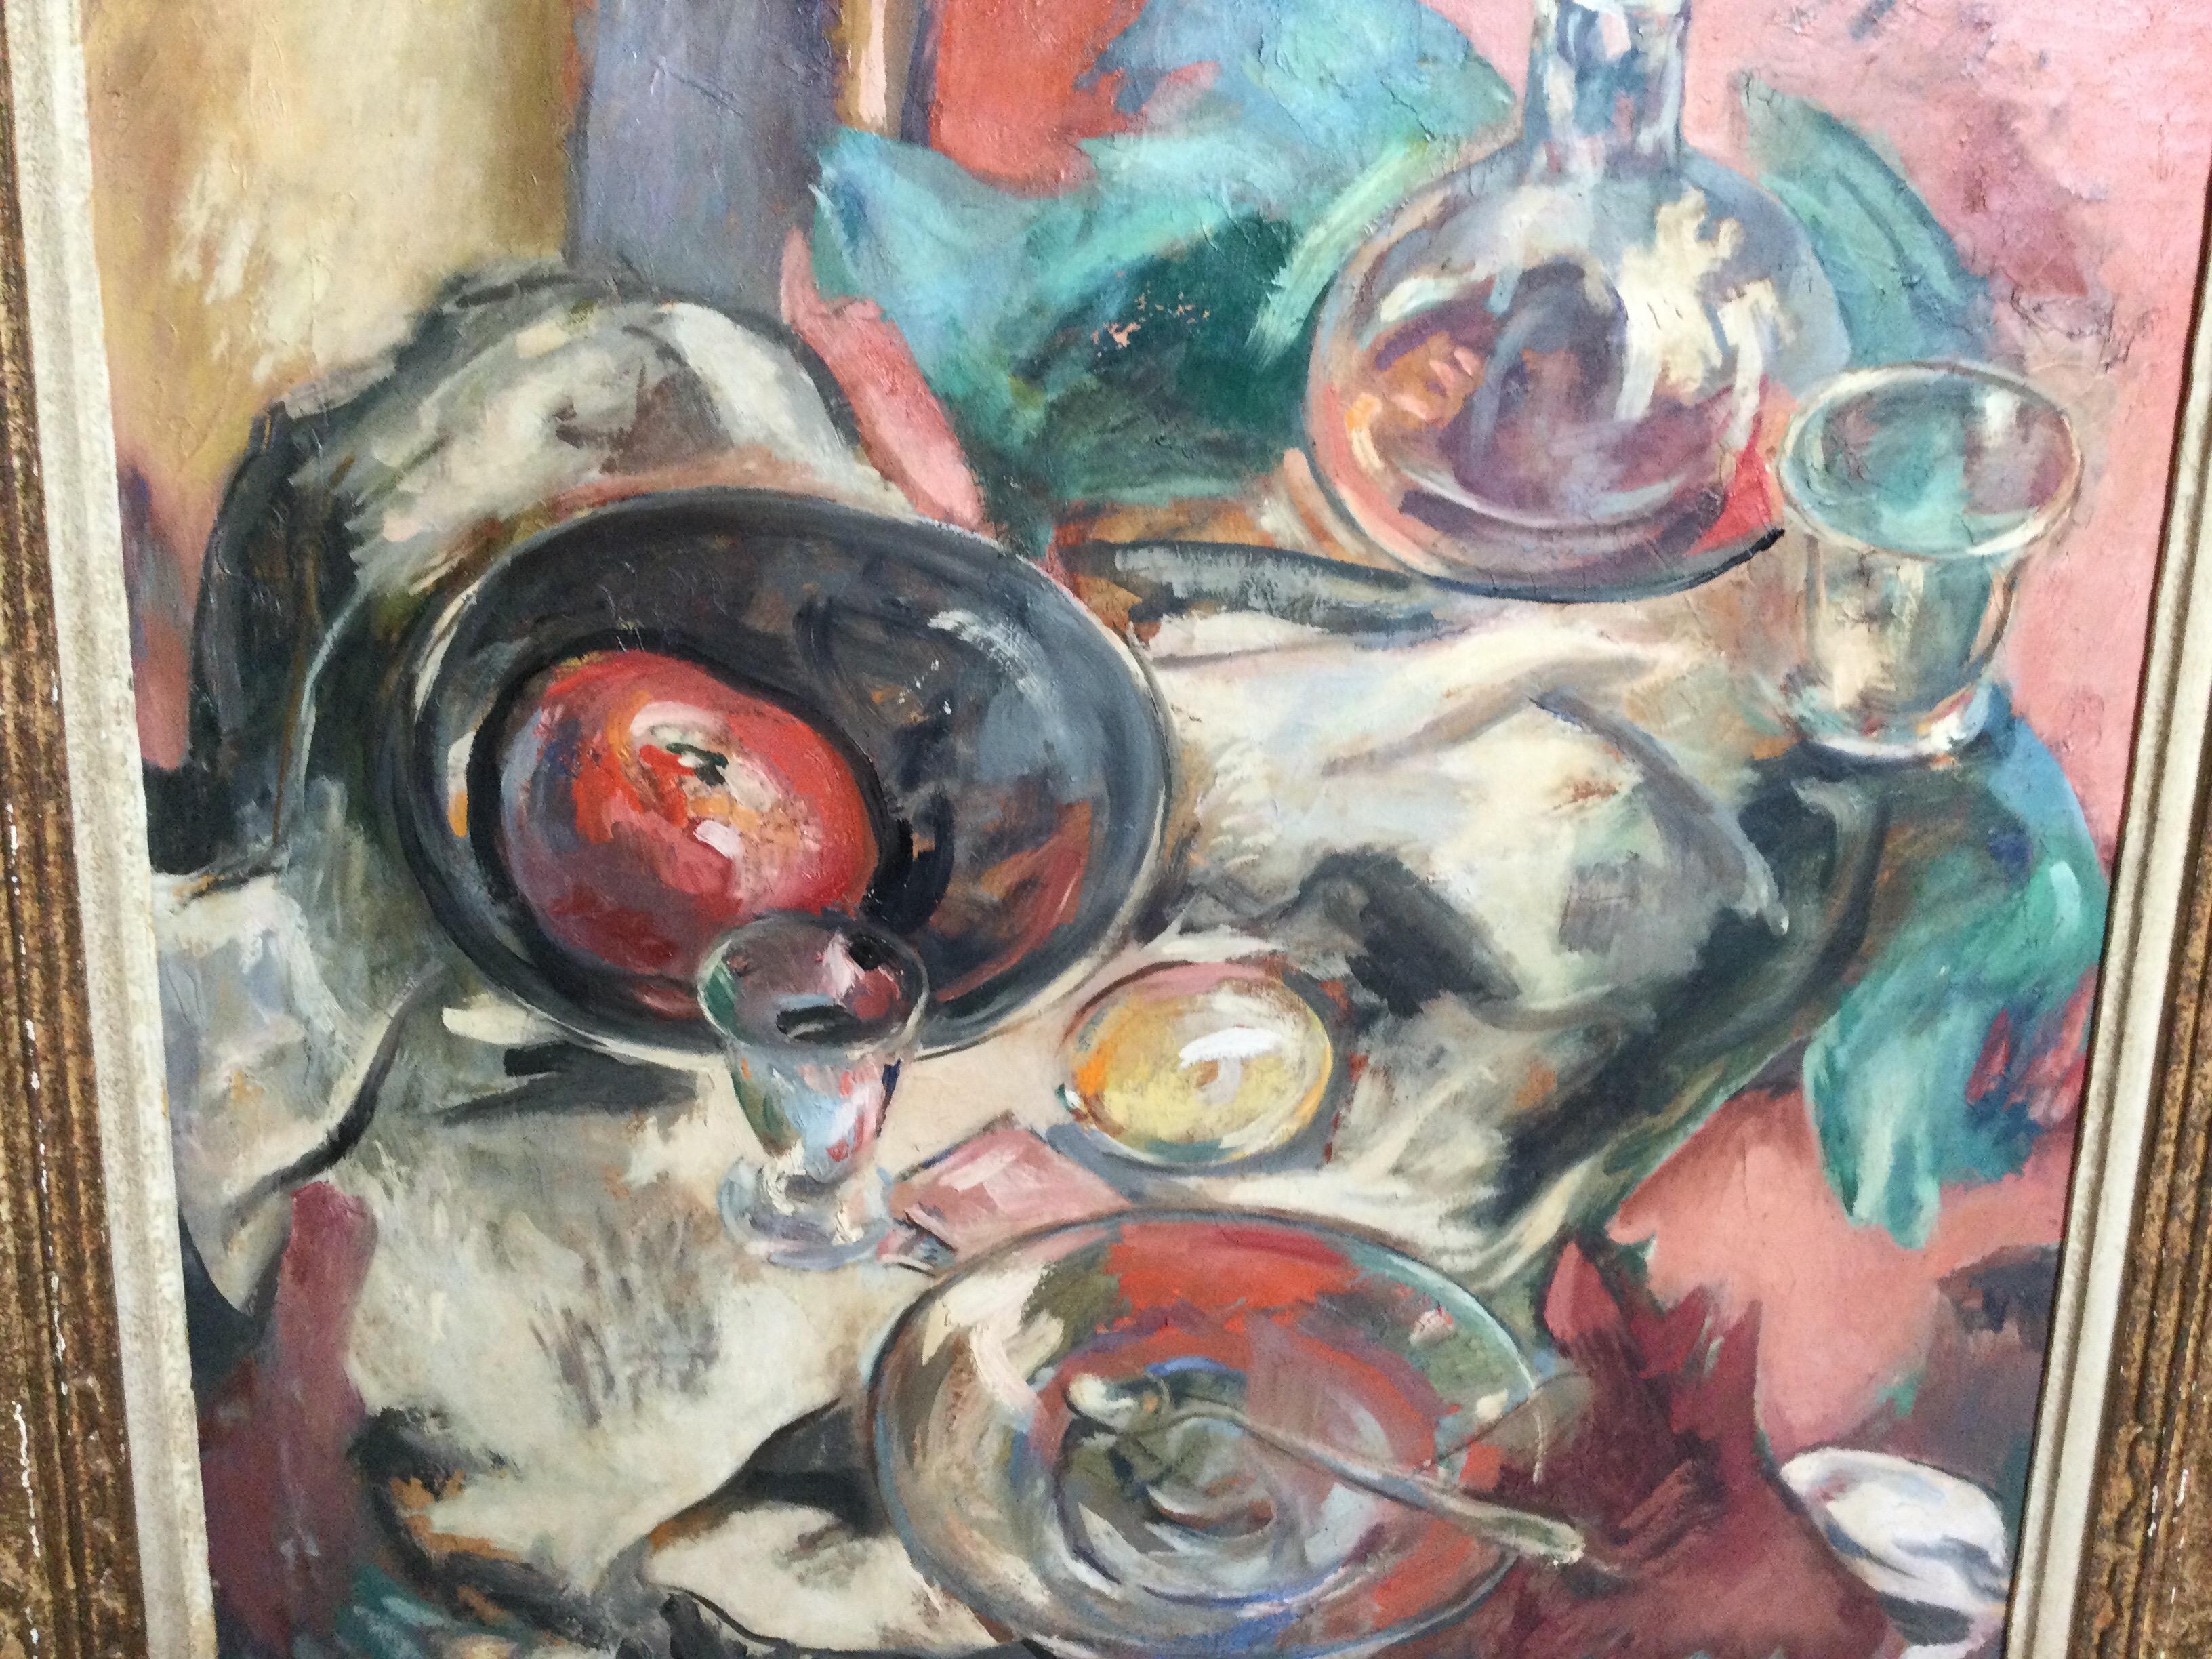 Great looking midcentury still life oil painting on canvas. Vibrant slightly abstract painting of fruit and glassware on a draped surface. Original scrubbed gilt frame. Signed Salcia Bahre on back.